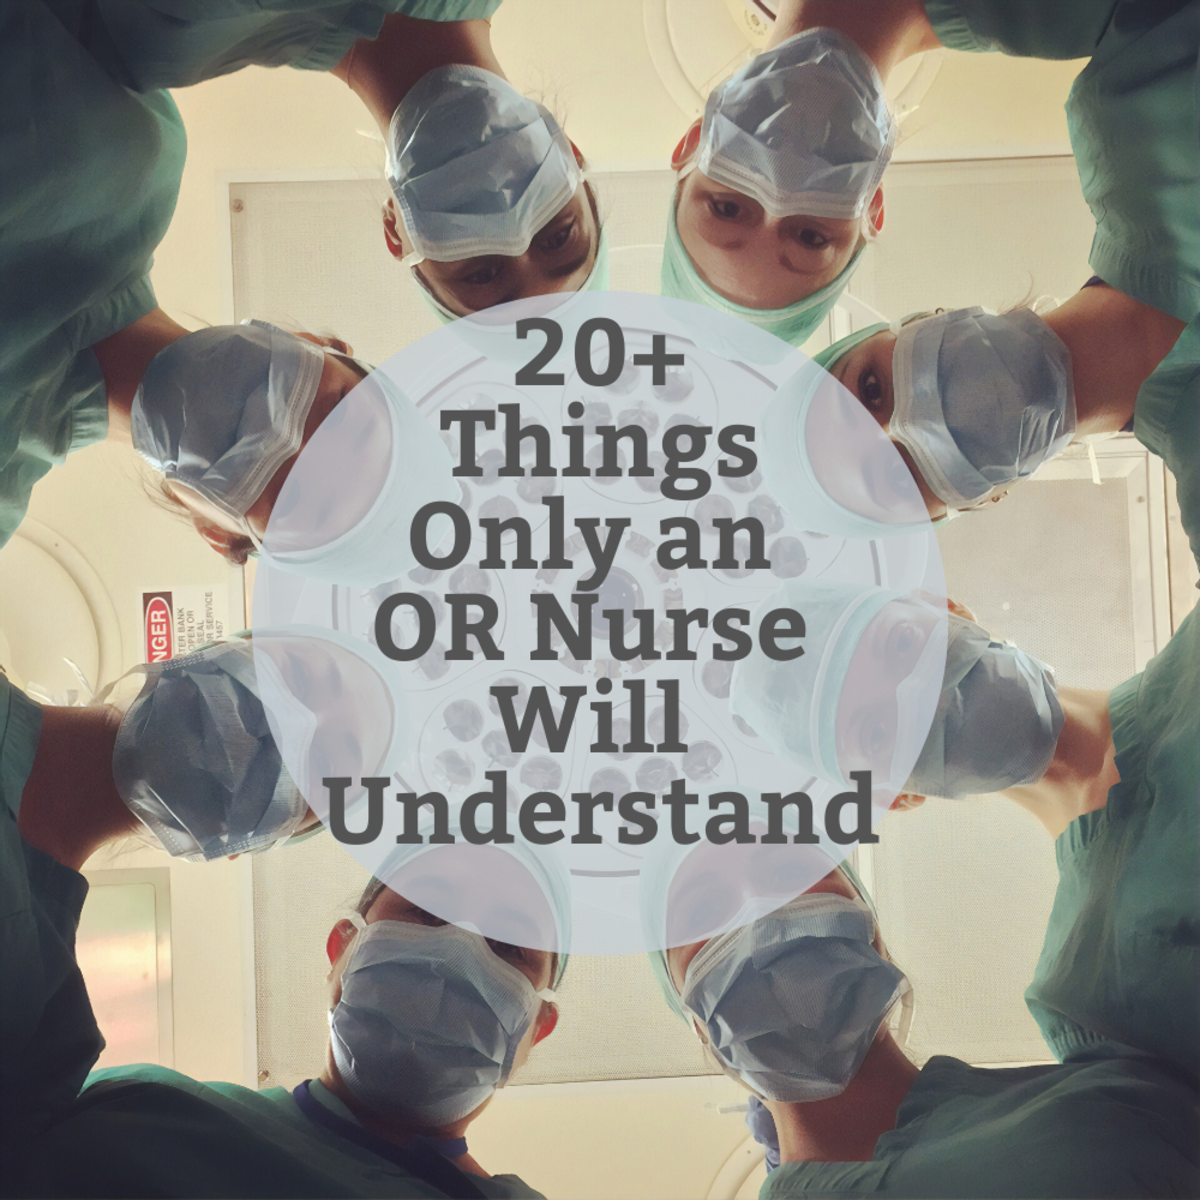 There are truths in this world that only an OR nurse can understand...